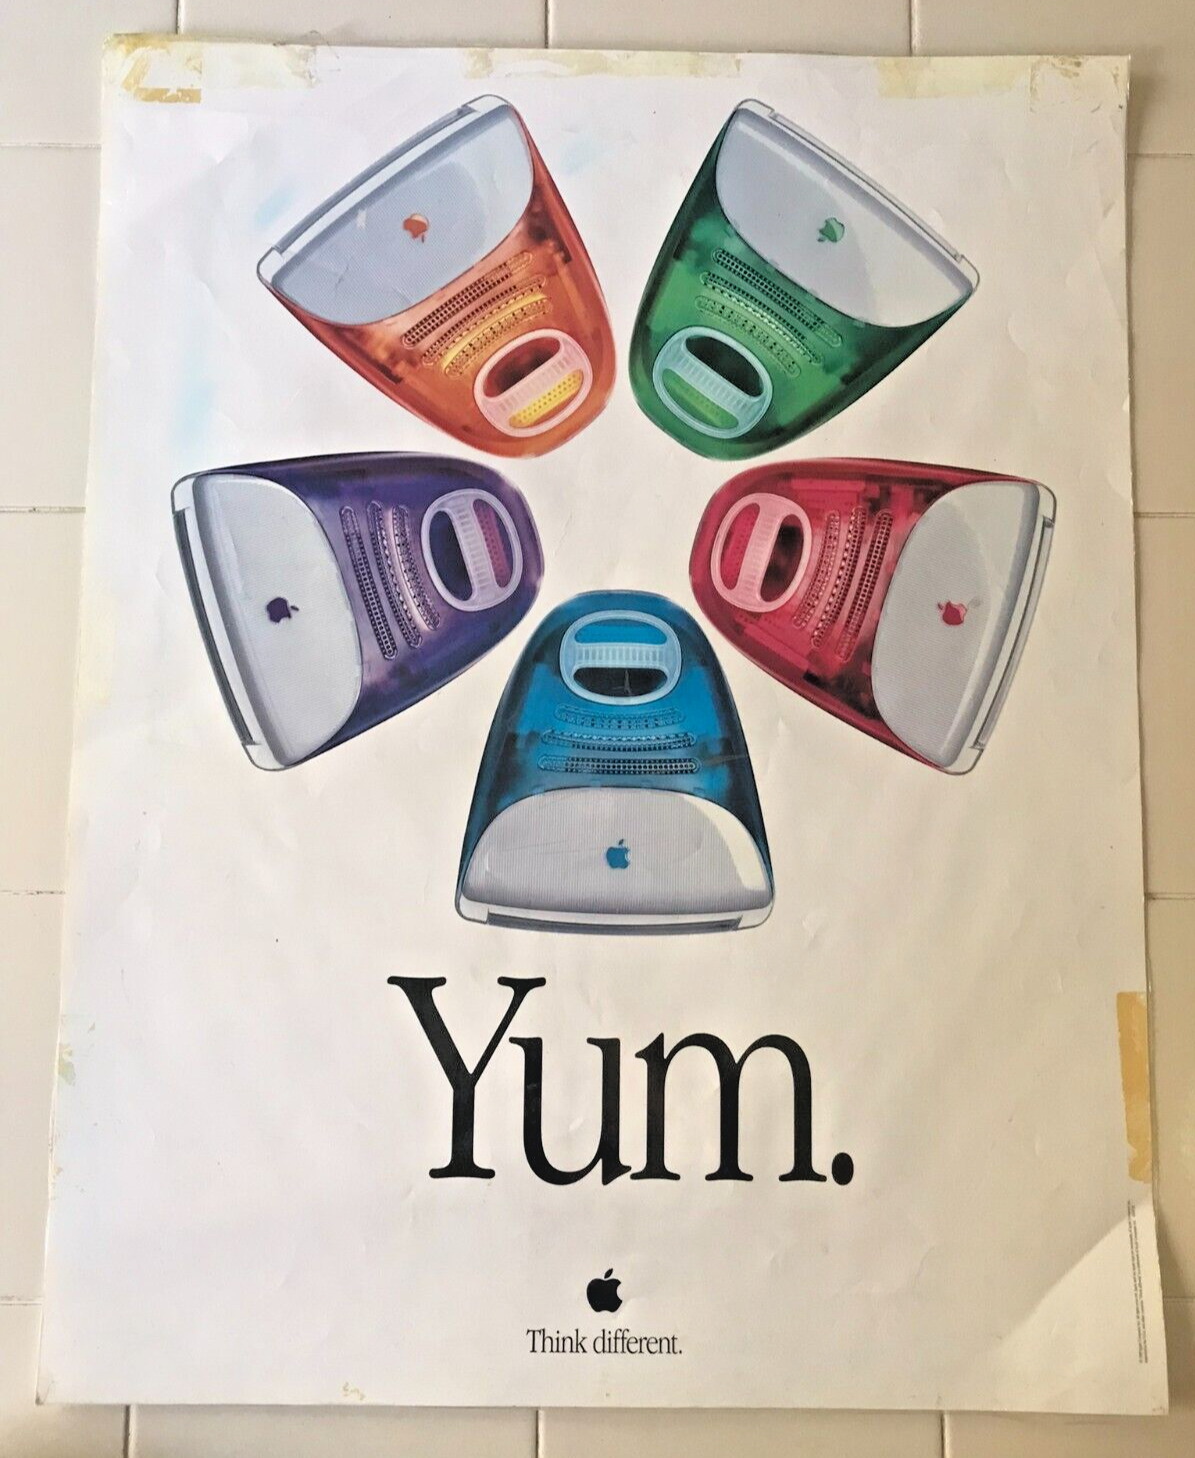 1999 Apple Computer iMac G3 Yum Poster Vintage Think Different 22 x 28 Laminated